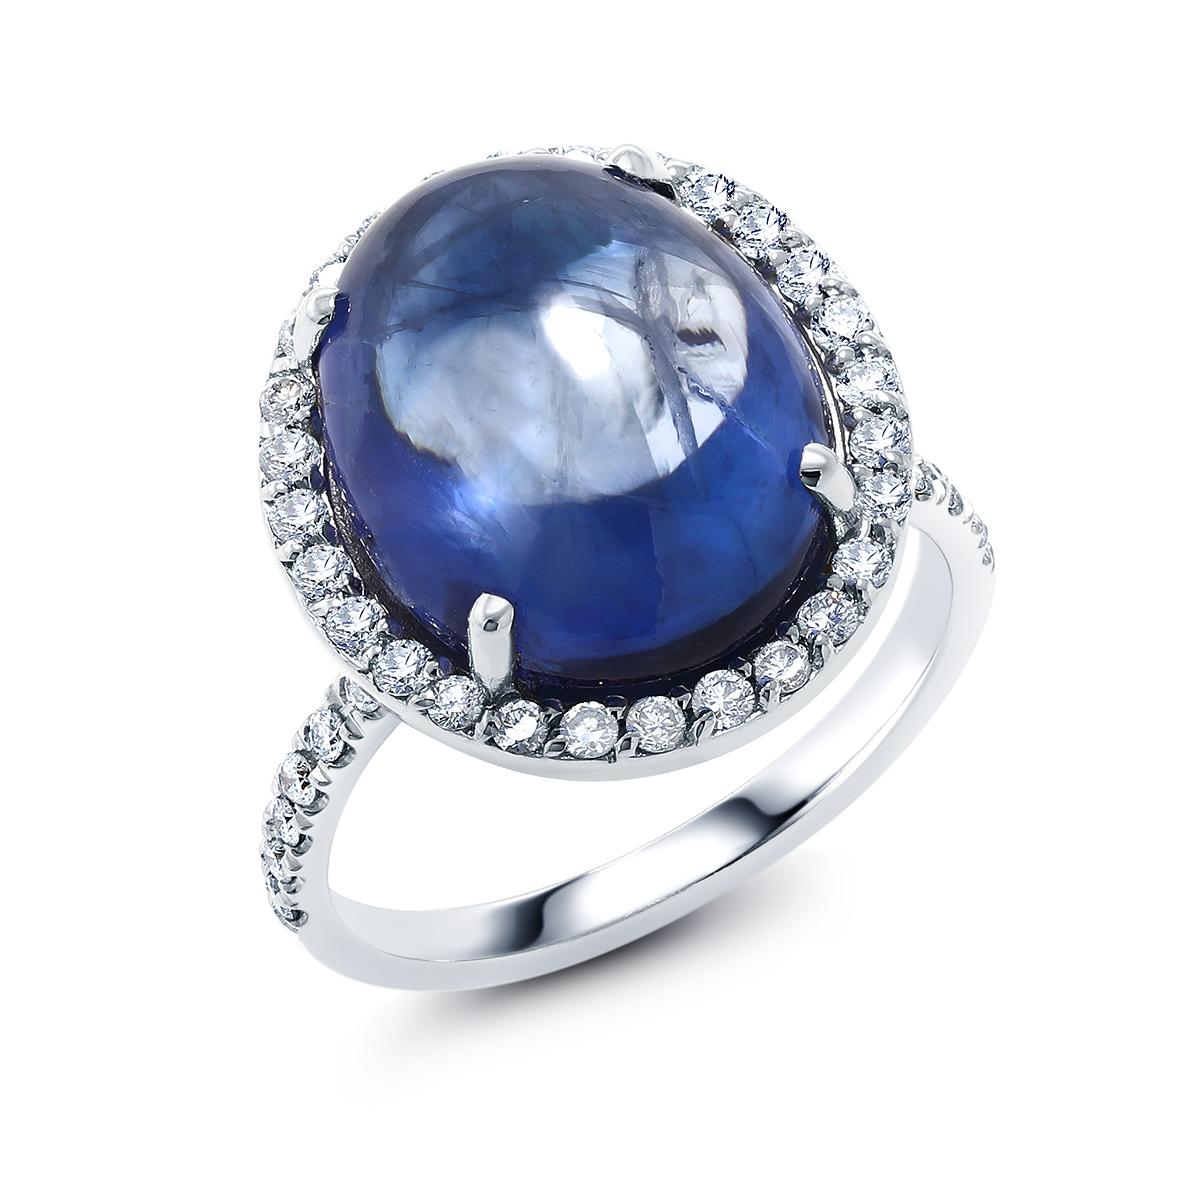 Contemporary Ceylon Cabochon Sapphire Diamond Gold Cocktail Ring Weighing 14.64 Carat